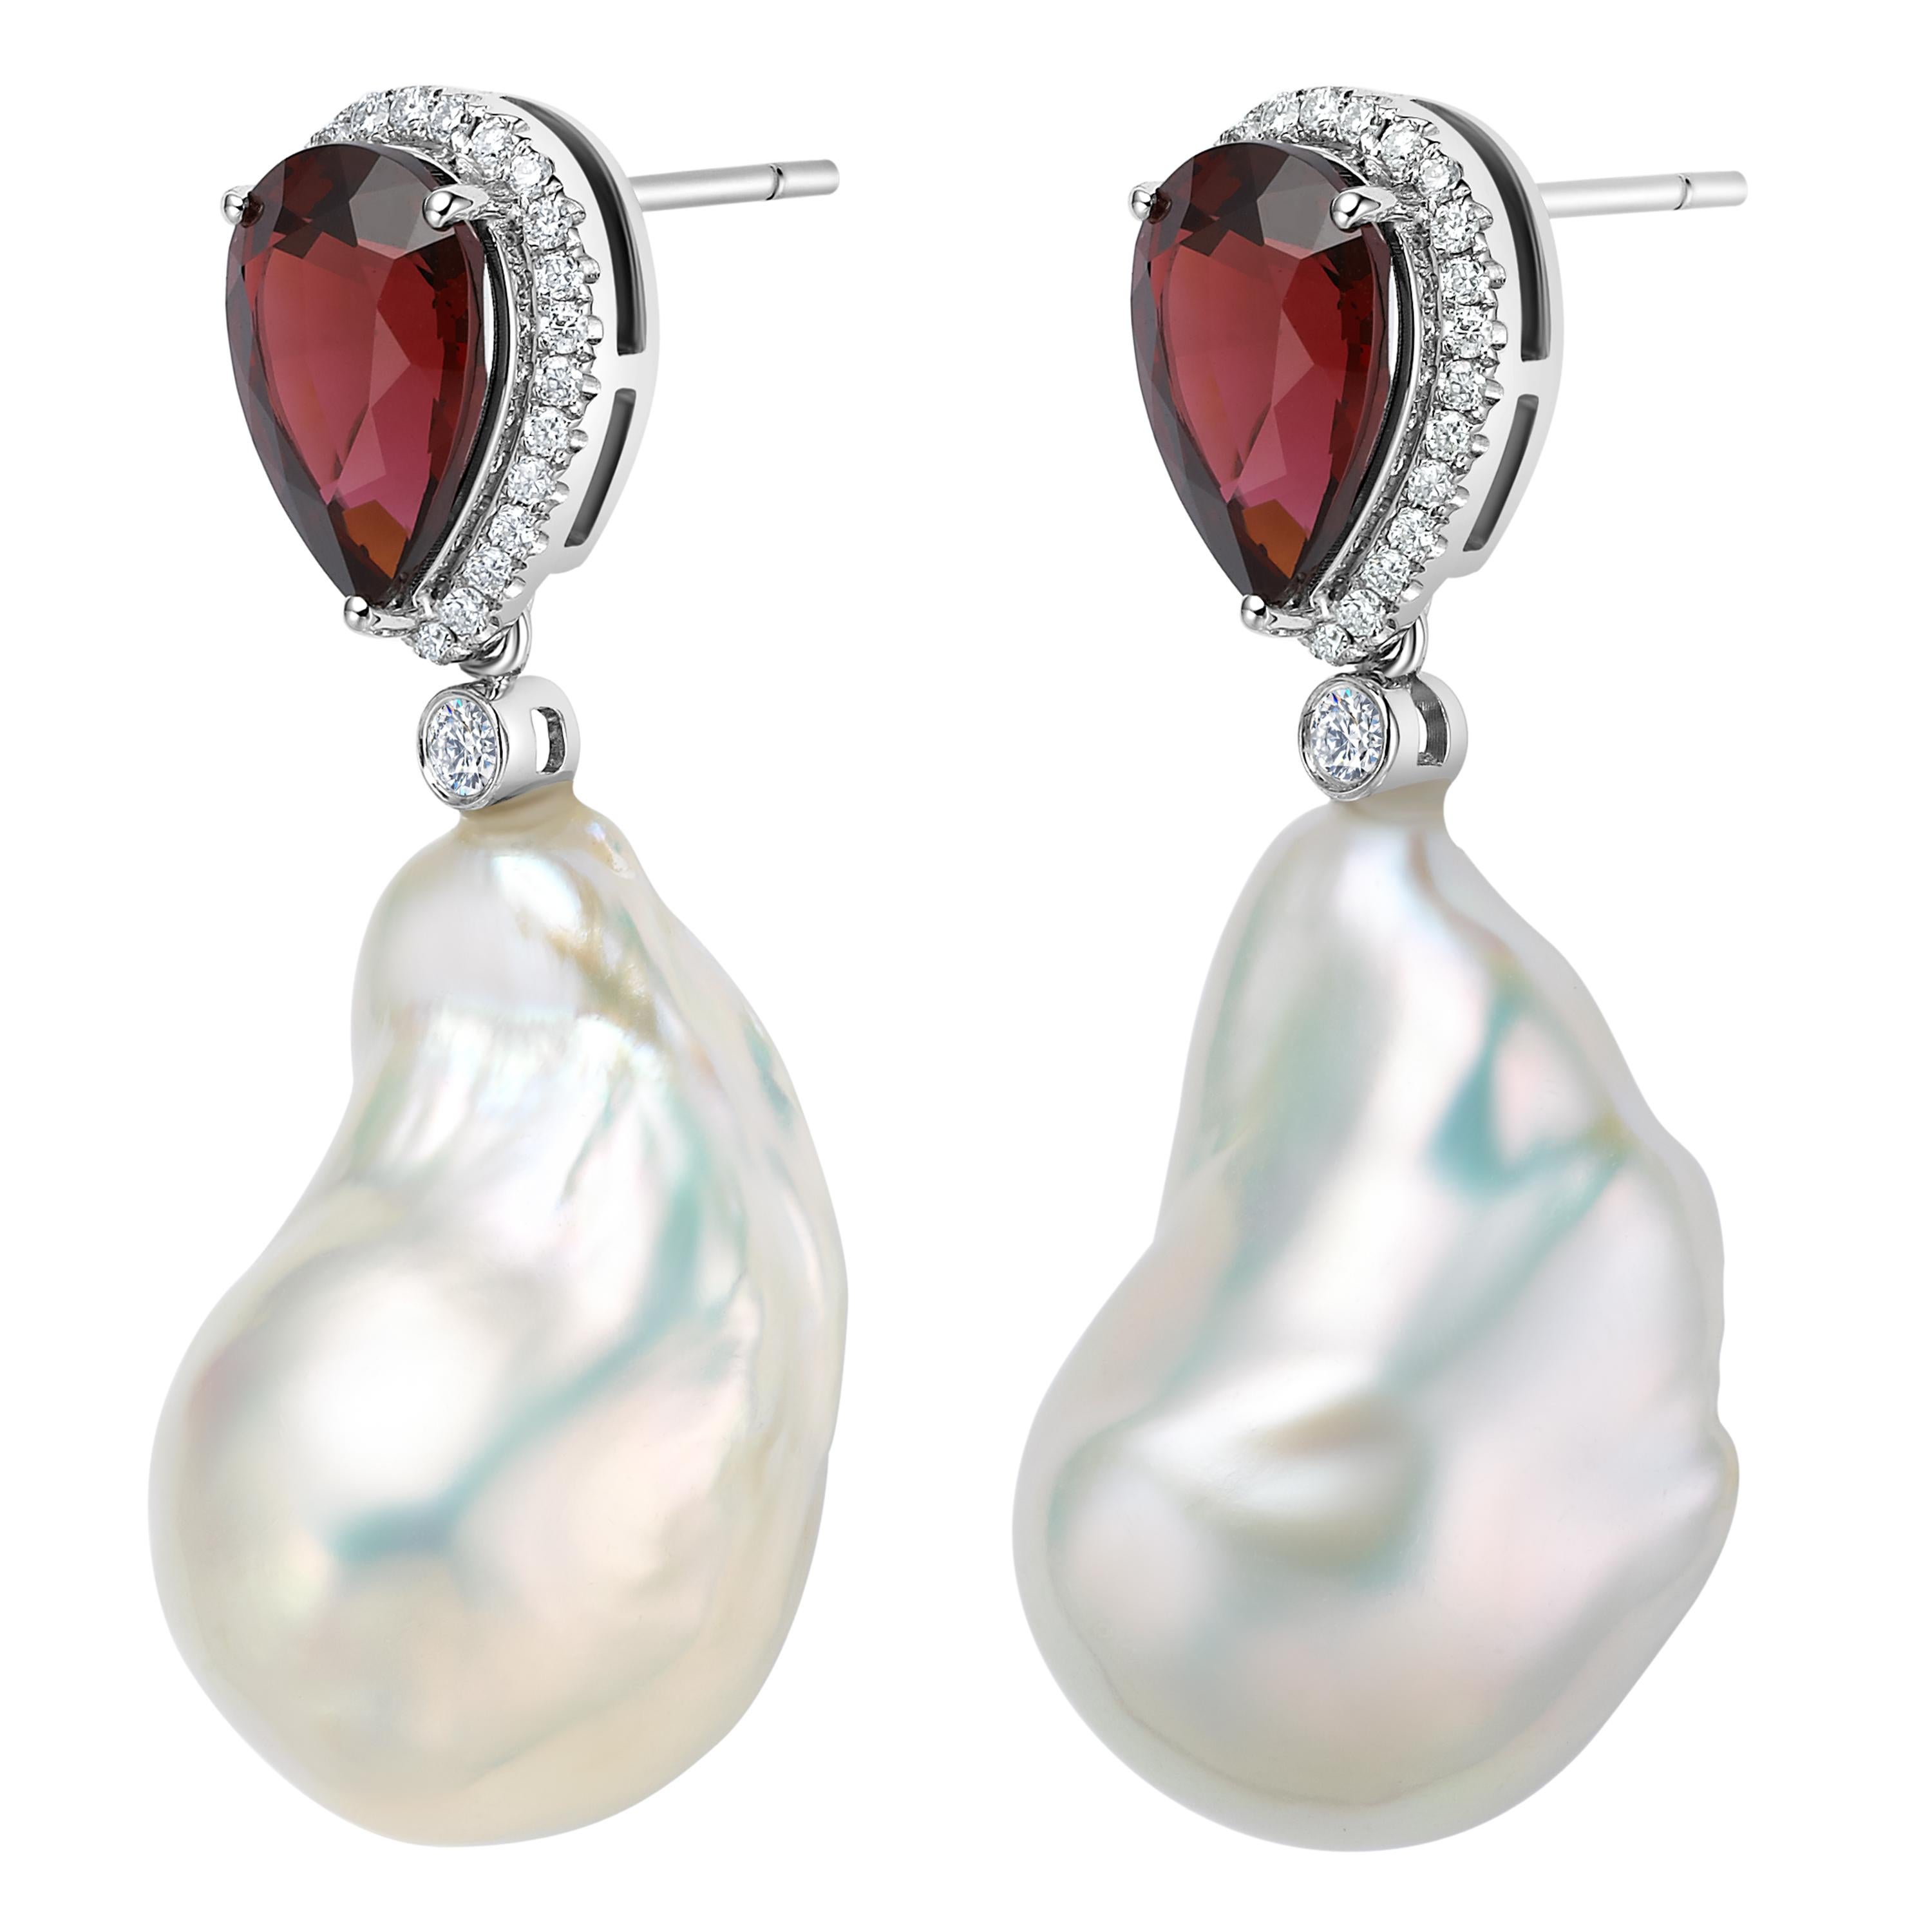 Description:
Two-piece stud and drop earrings with 3.06ct red garnet, bordering 0.285ct white diamonds and detachable baroque pearl set in 18ct white gold.

Inspiration:
Two-piece earrings encapsulating the juxtaposition of natural gemstones, which